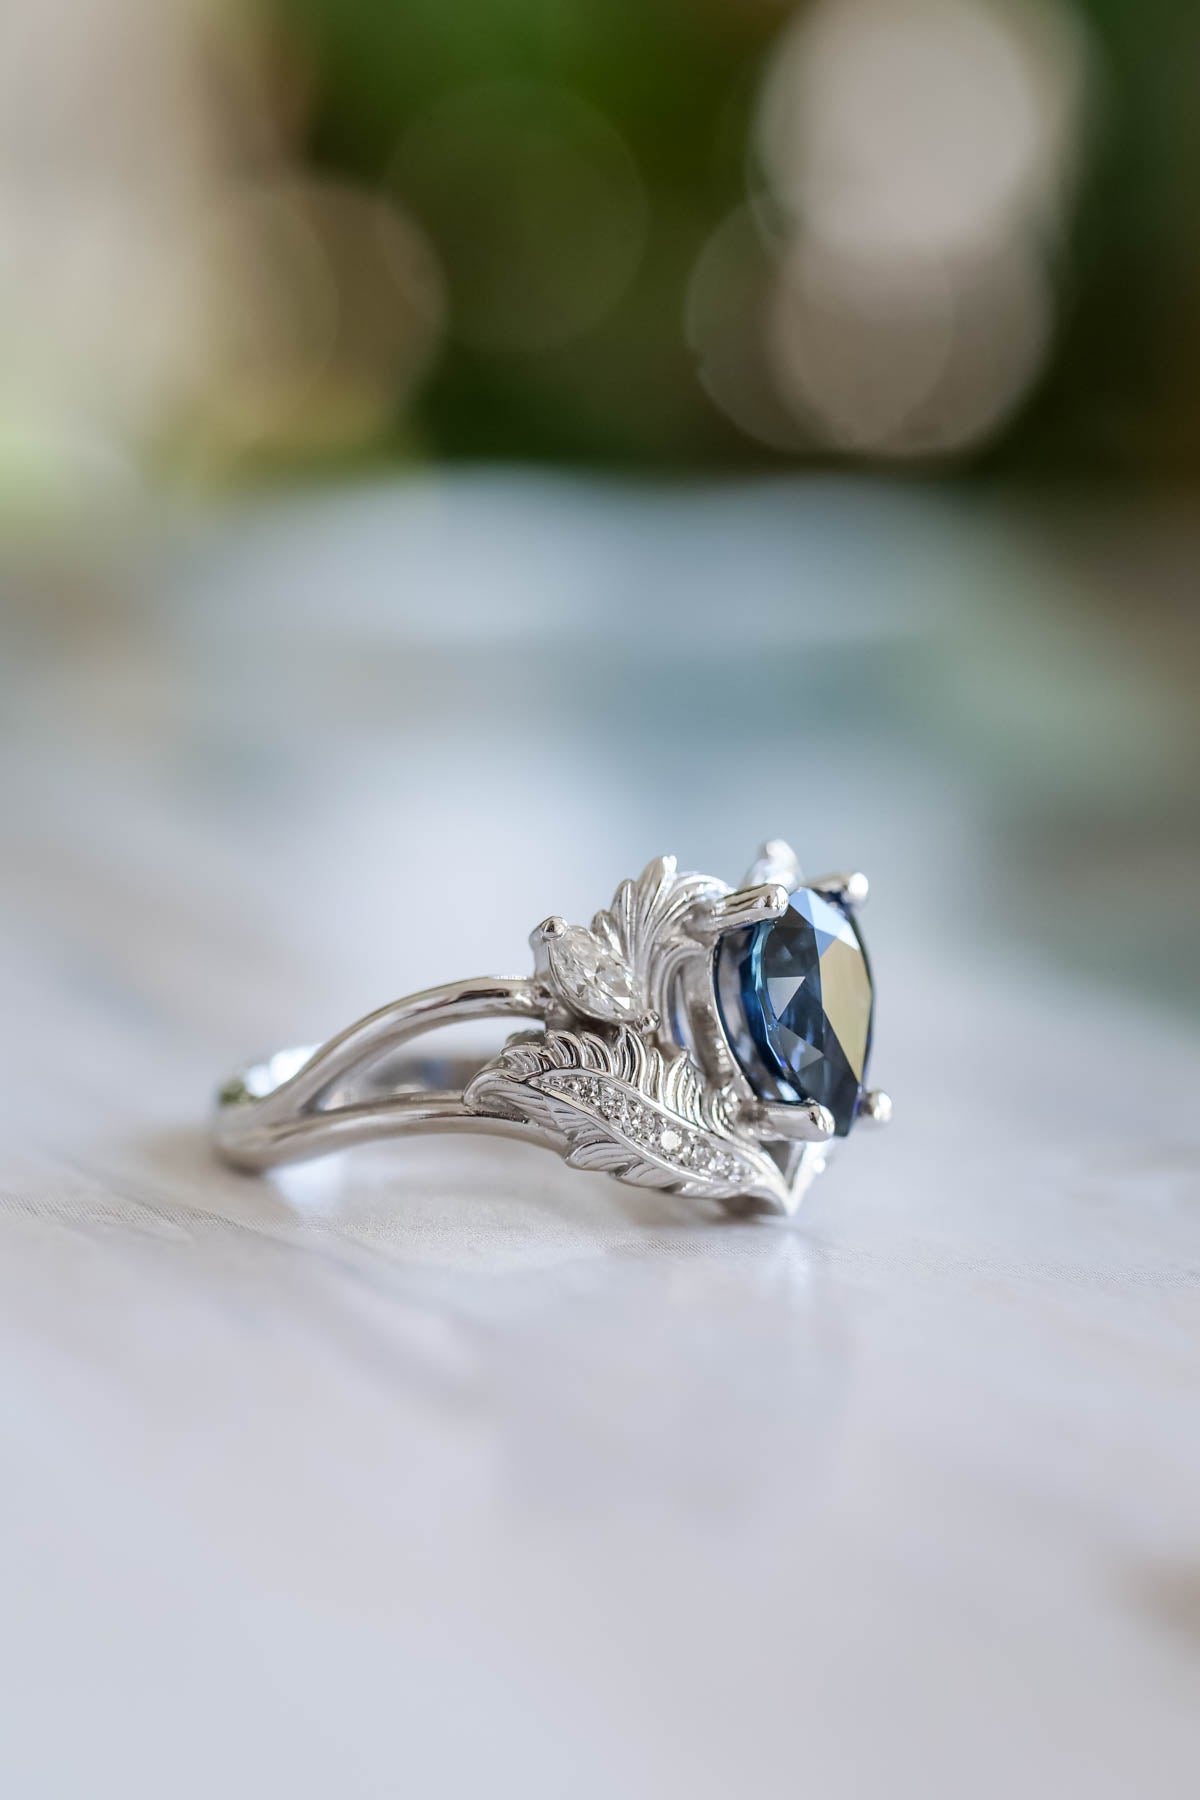 Royal blue sapphire engagement ring, gold nature inspired ring with diamonds / Adonis - Eden Garden Jewelry™